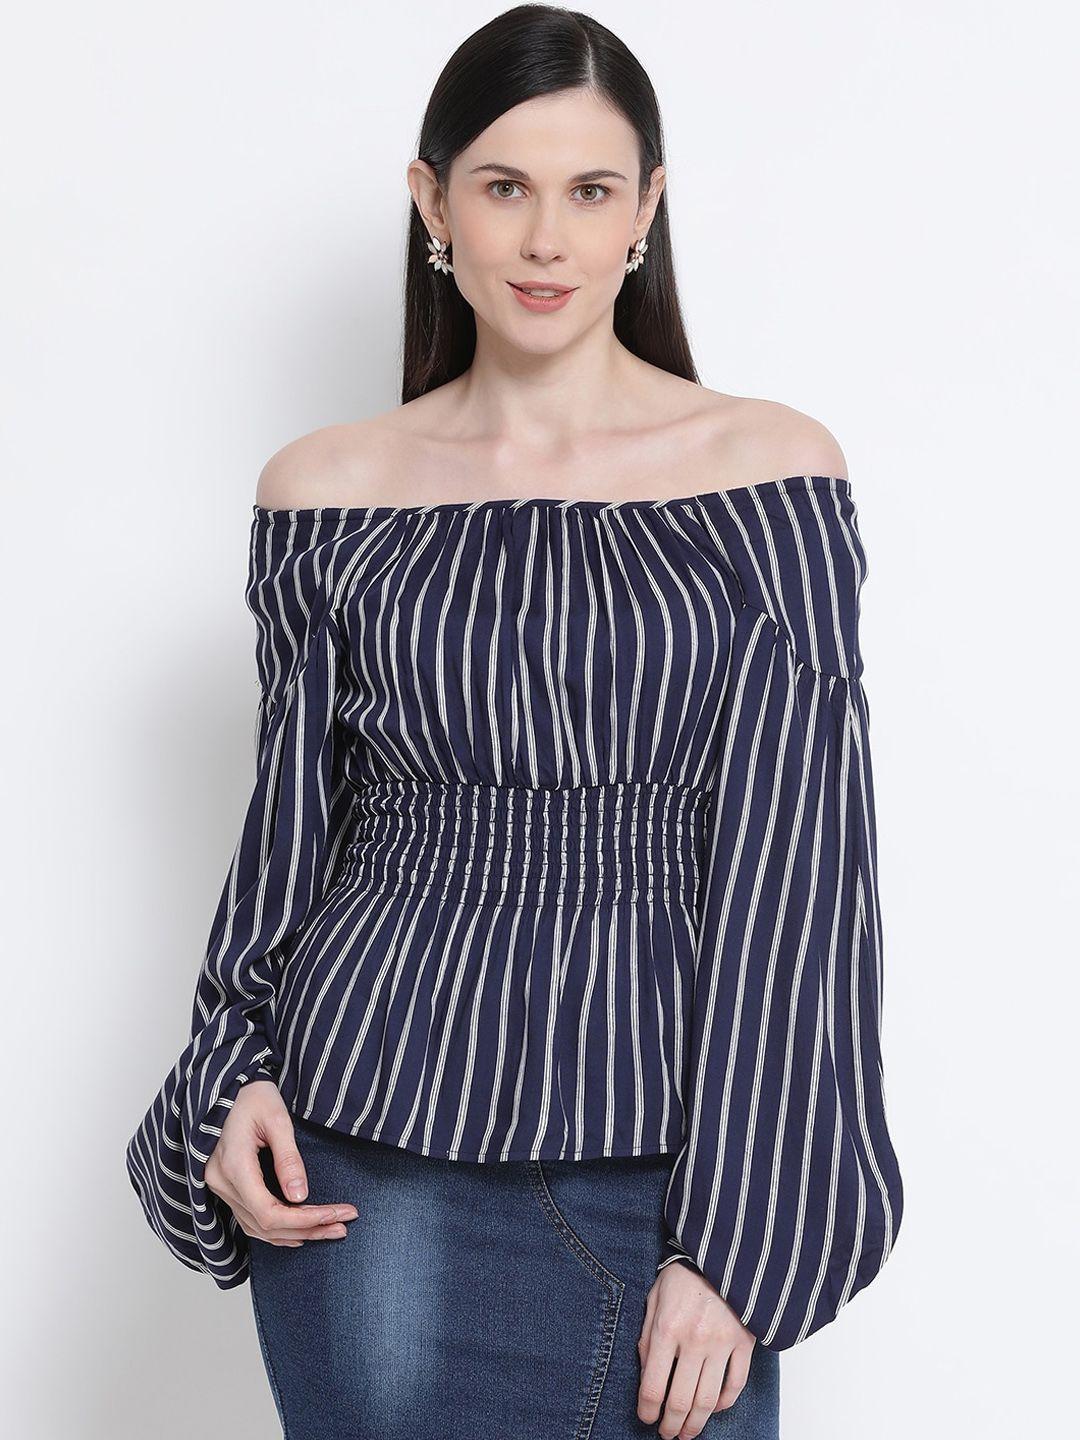 oxolloxo women navy blue striped cinched waist top